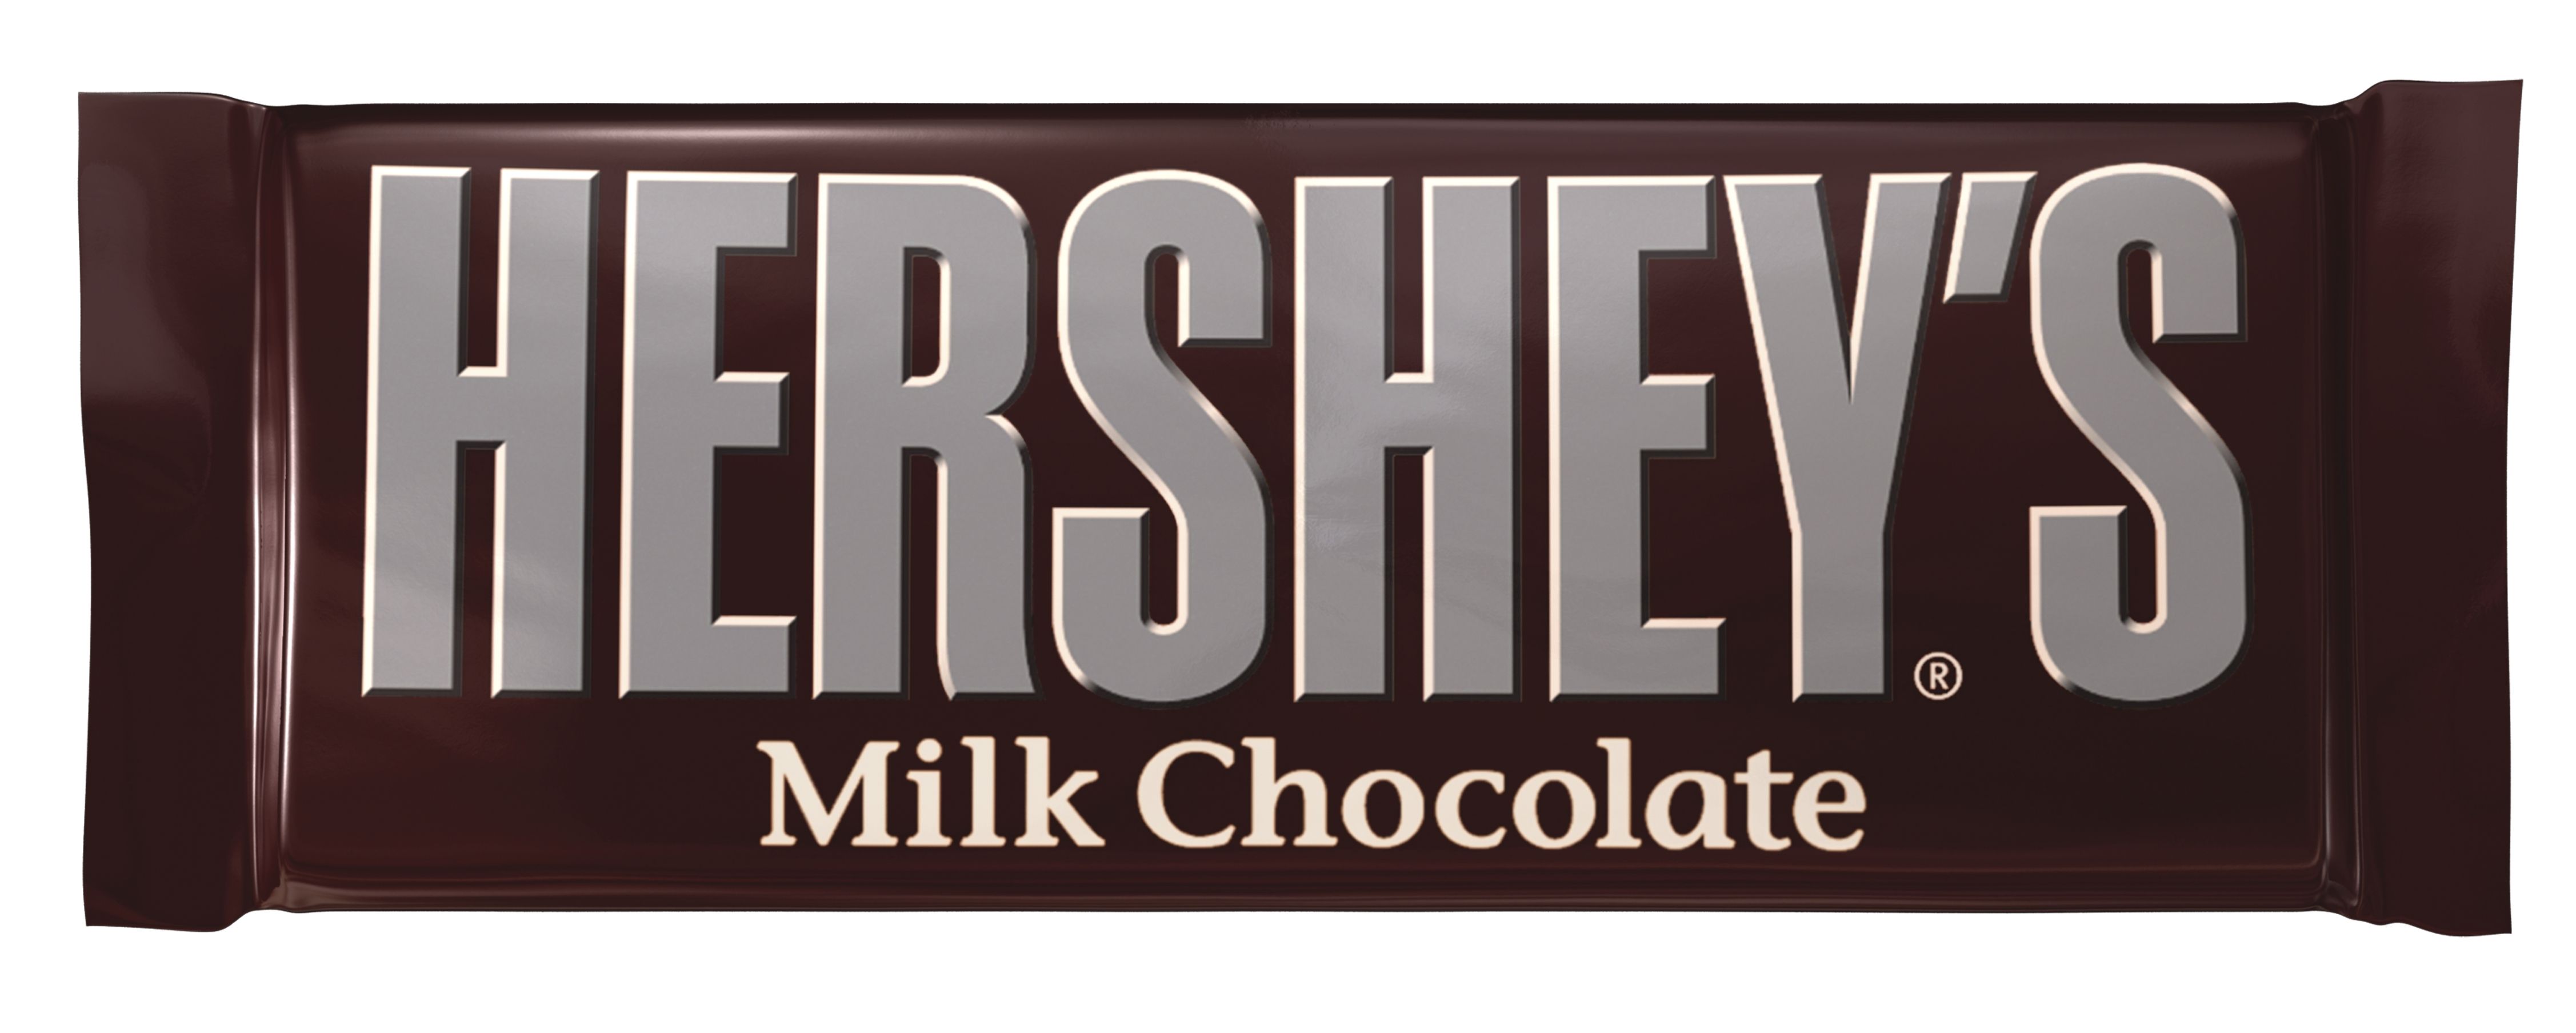 The S'more the Merrier!. Chocolate milk, Chocolate candy bar, Hershey candy